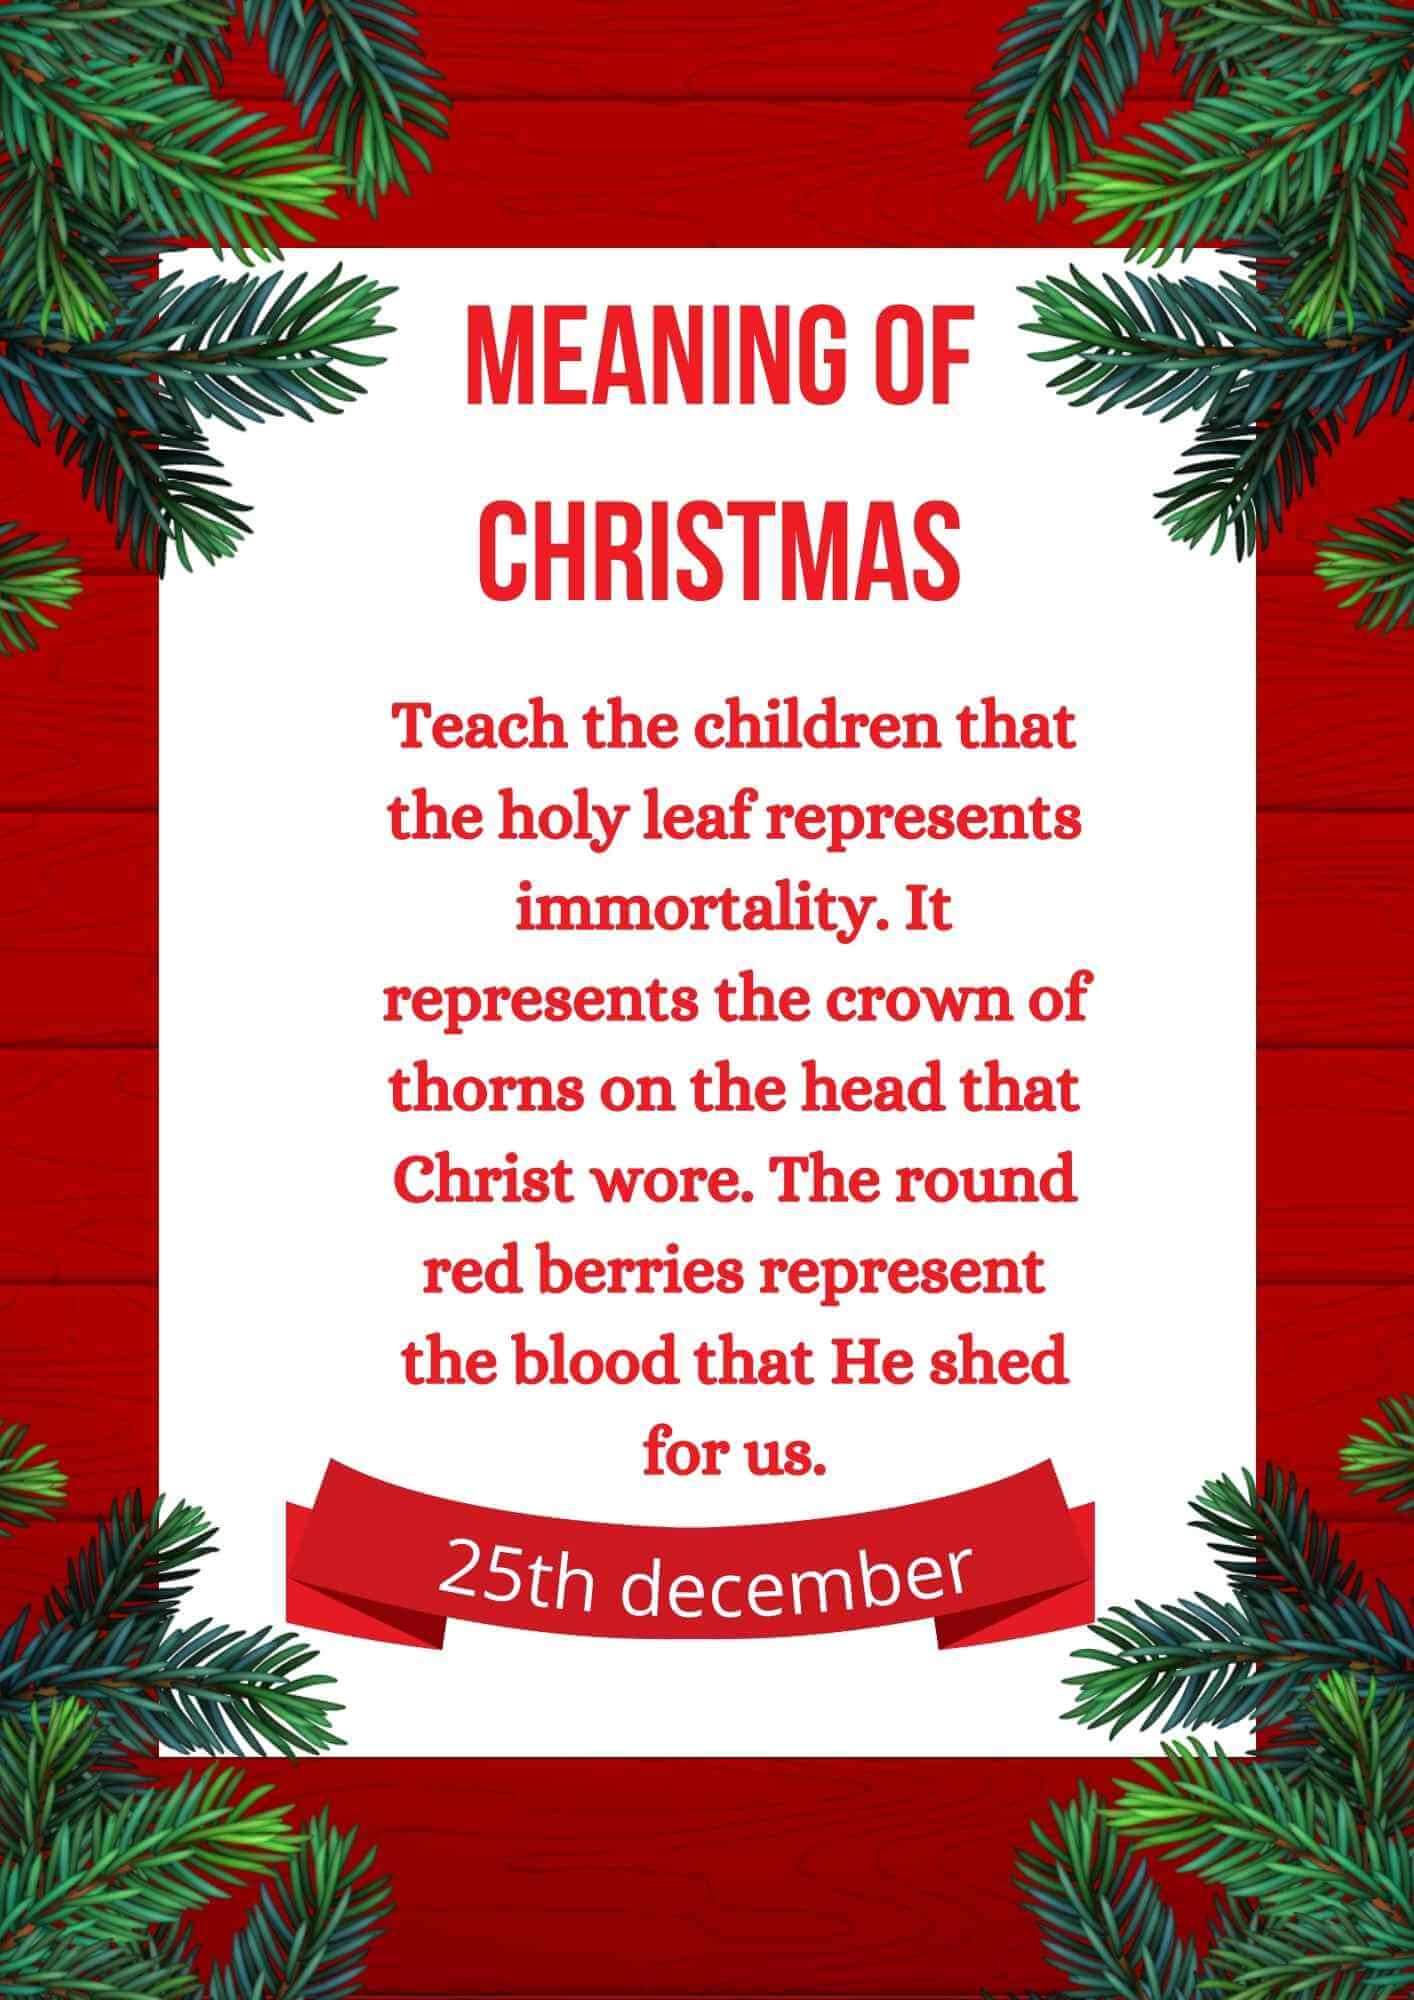 What is the meaning of christmas